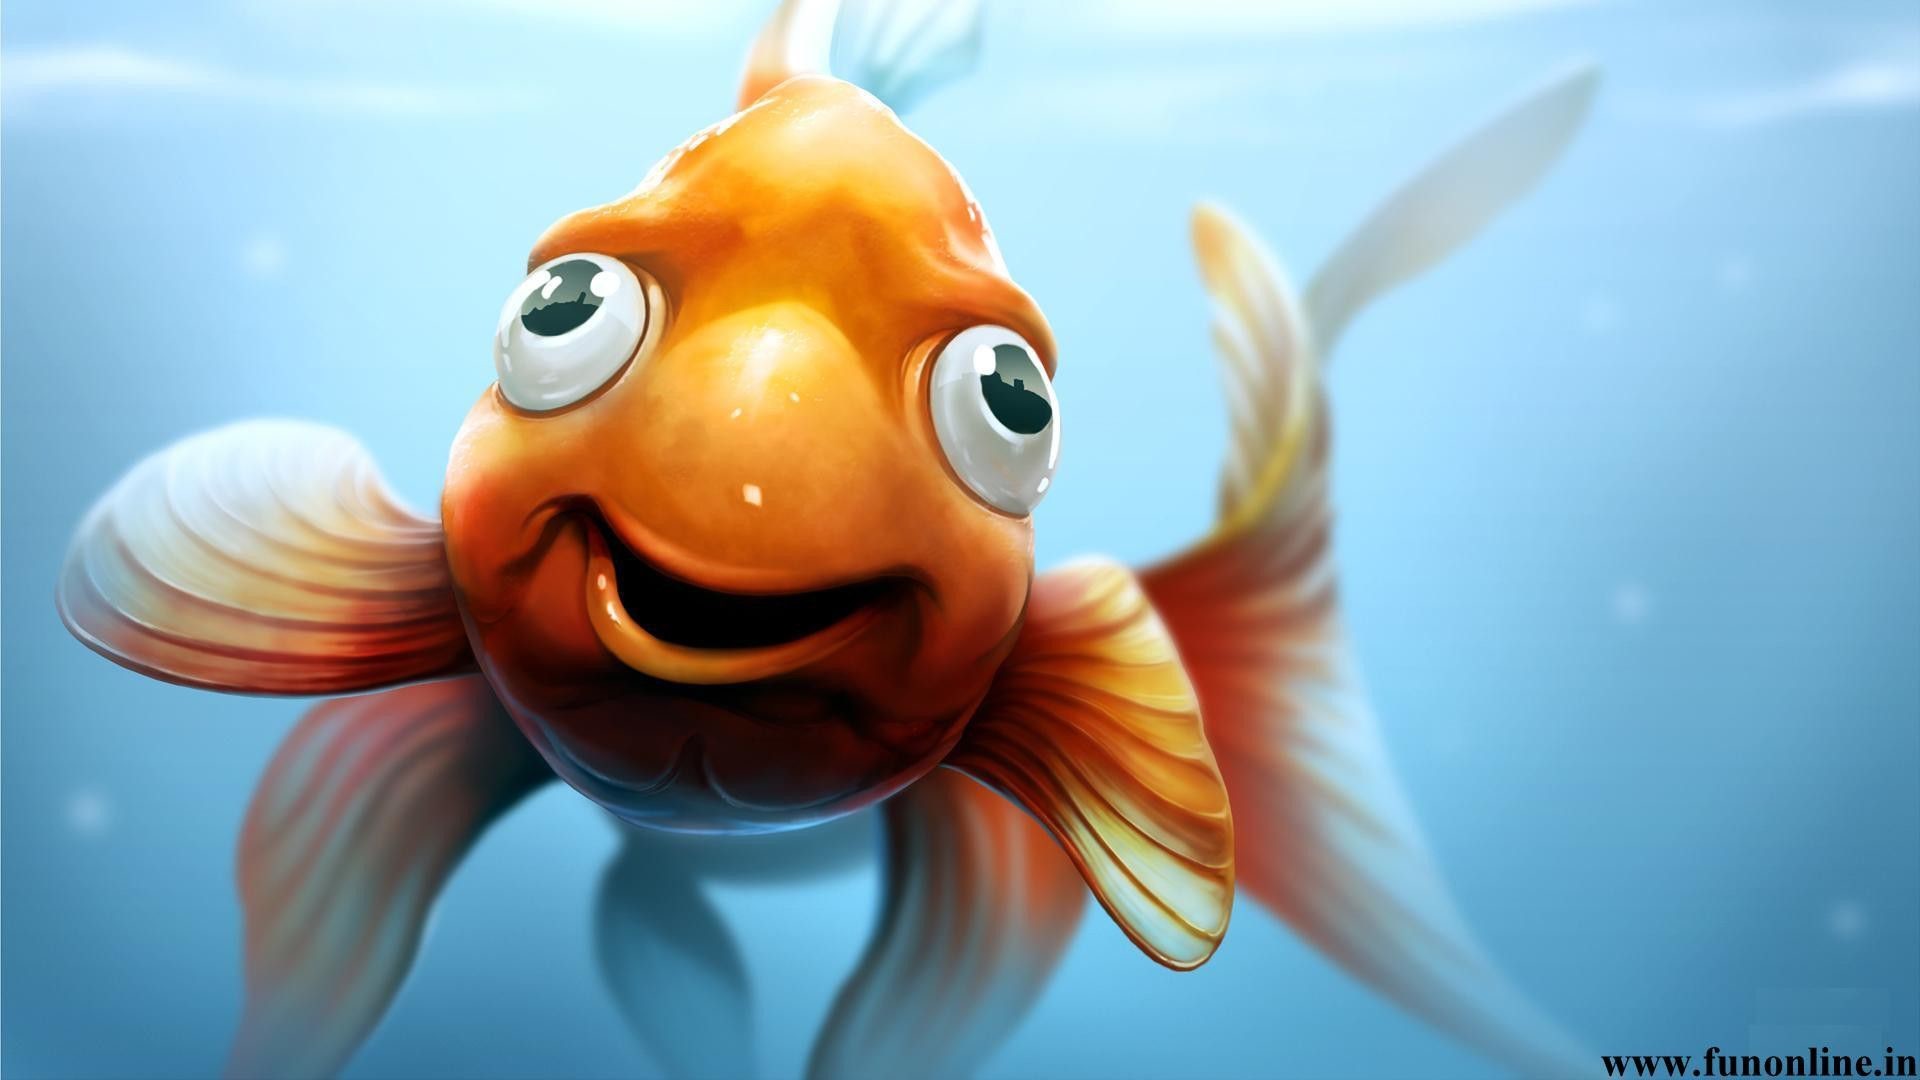 1920x1080 ... Goldfish On Blue Background Wallpaper Stock Photo, Picture And ..